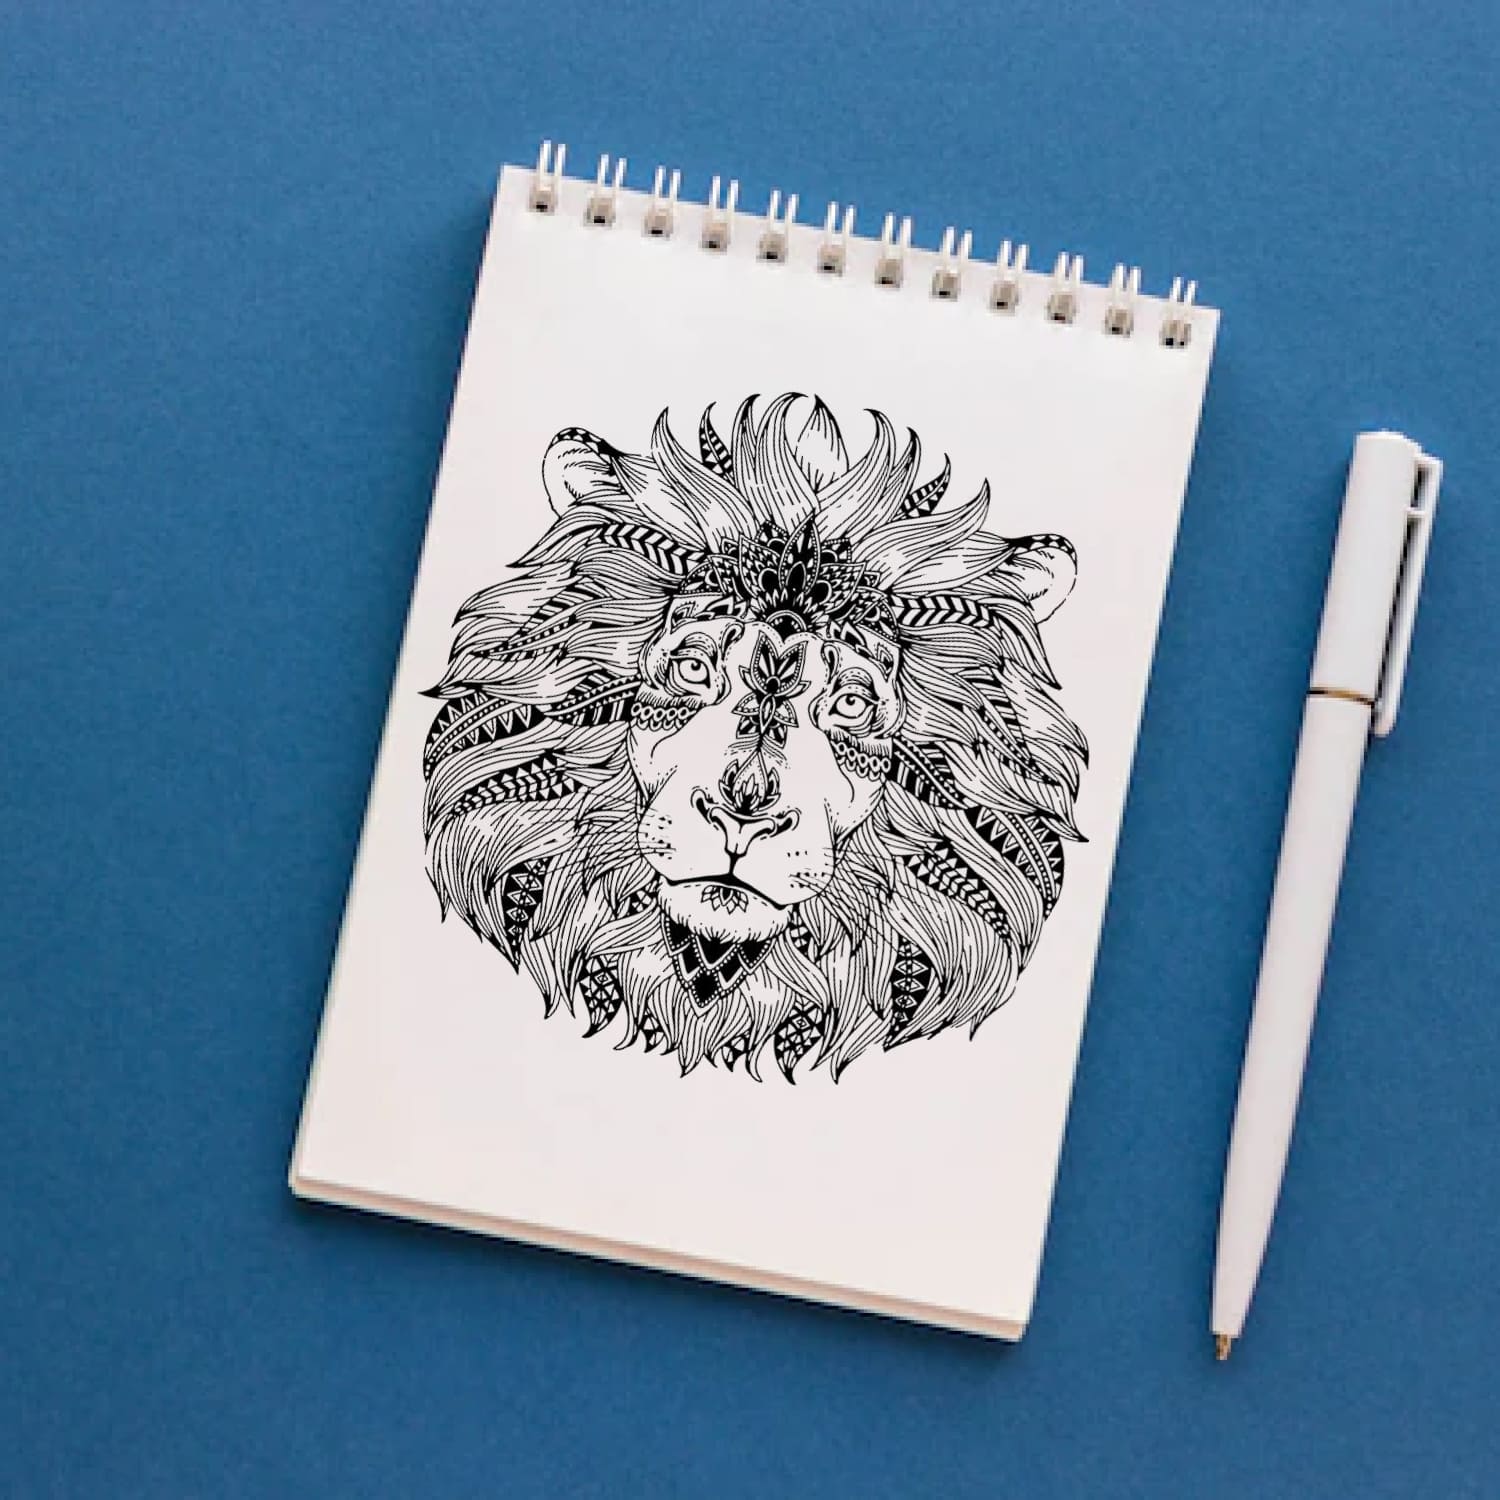 Hand drawn Lion cover.